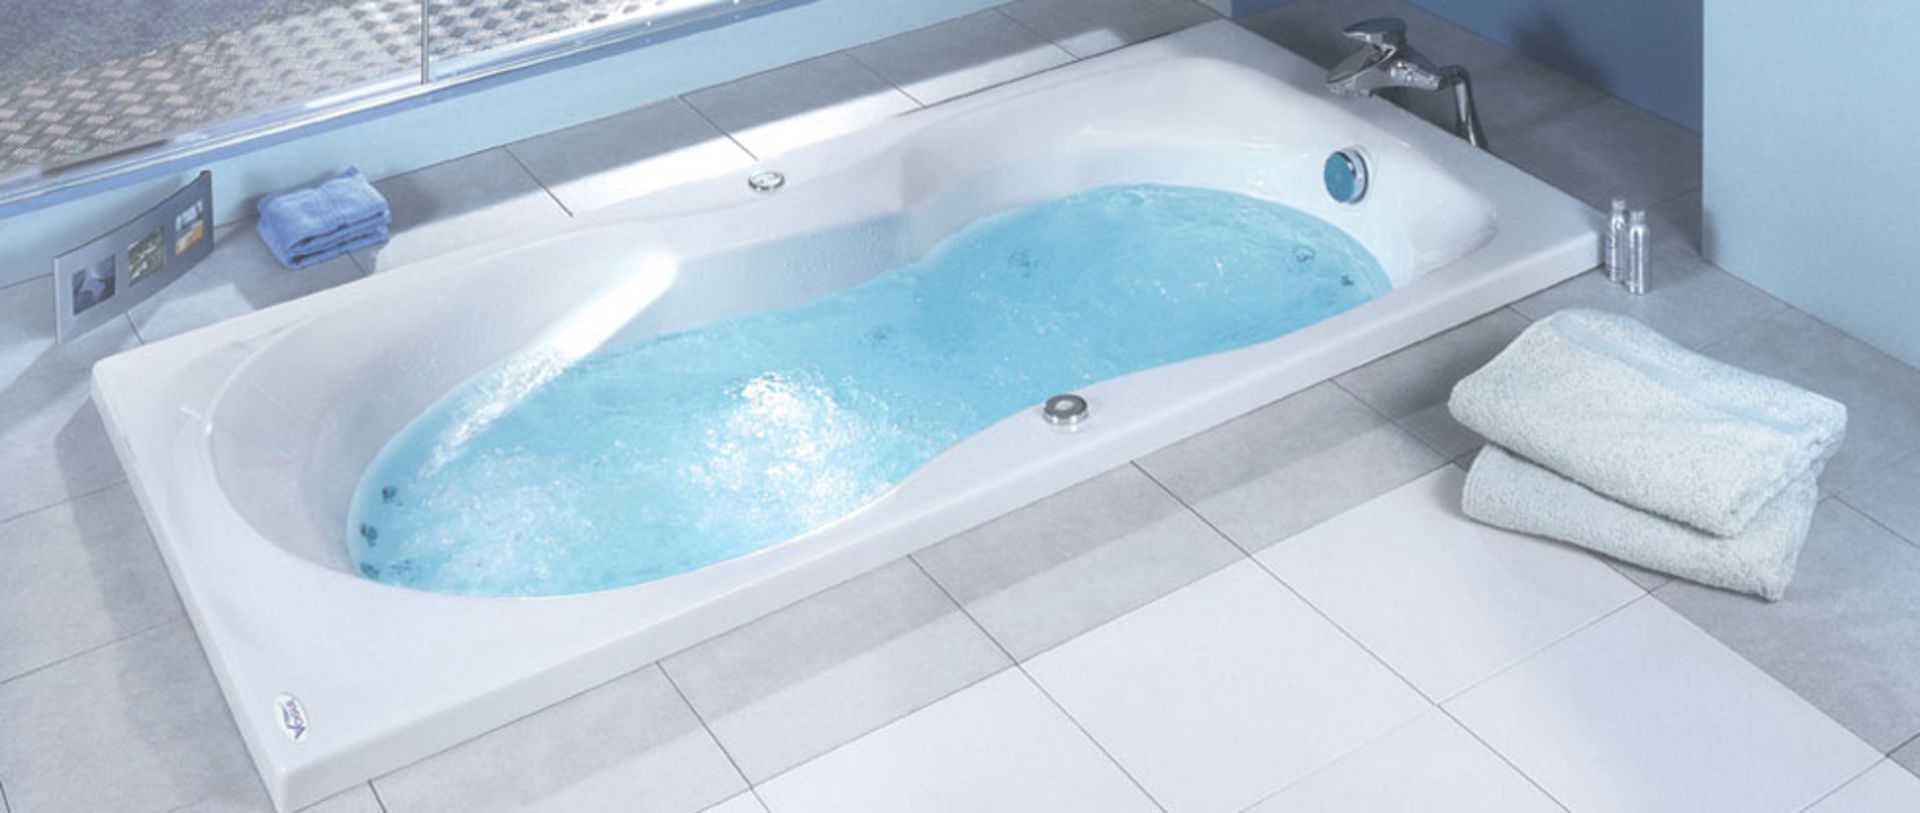 1 x Vogue Bathrooms Sapphire Double Ended Inset Bath Tub - Size: 1800 x 900mm - For The Ultimate - Image 3 of 3